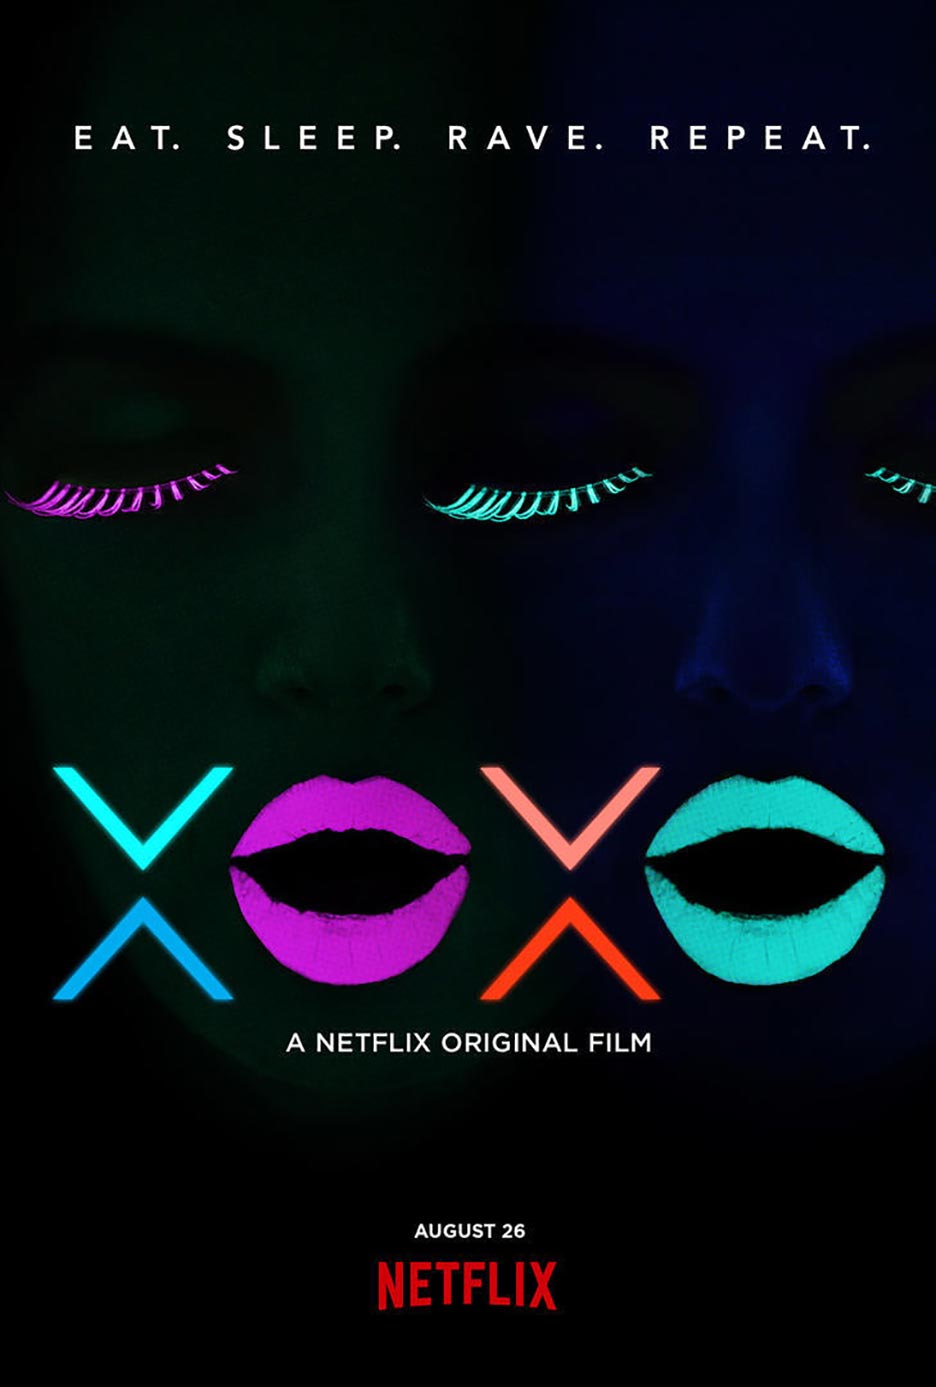 Movie Review Xoxo 2016 Lolo Loves Films